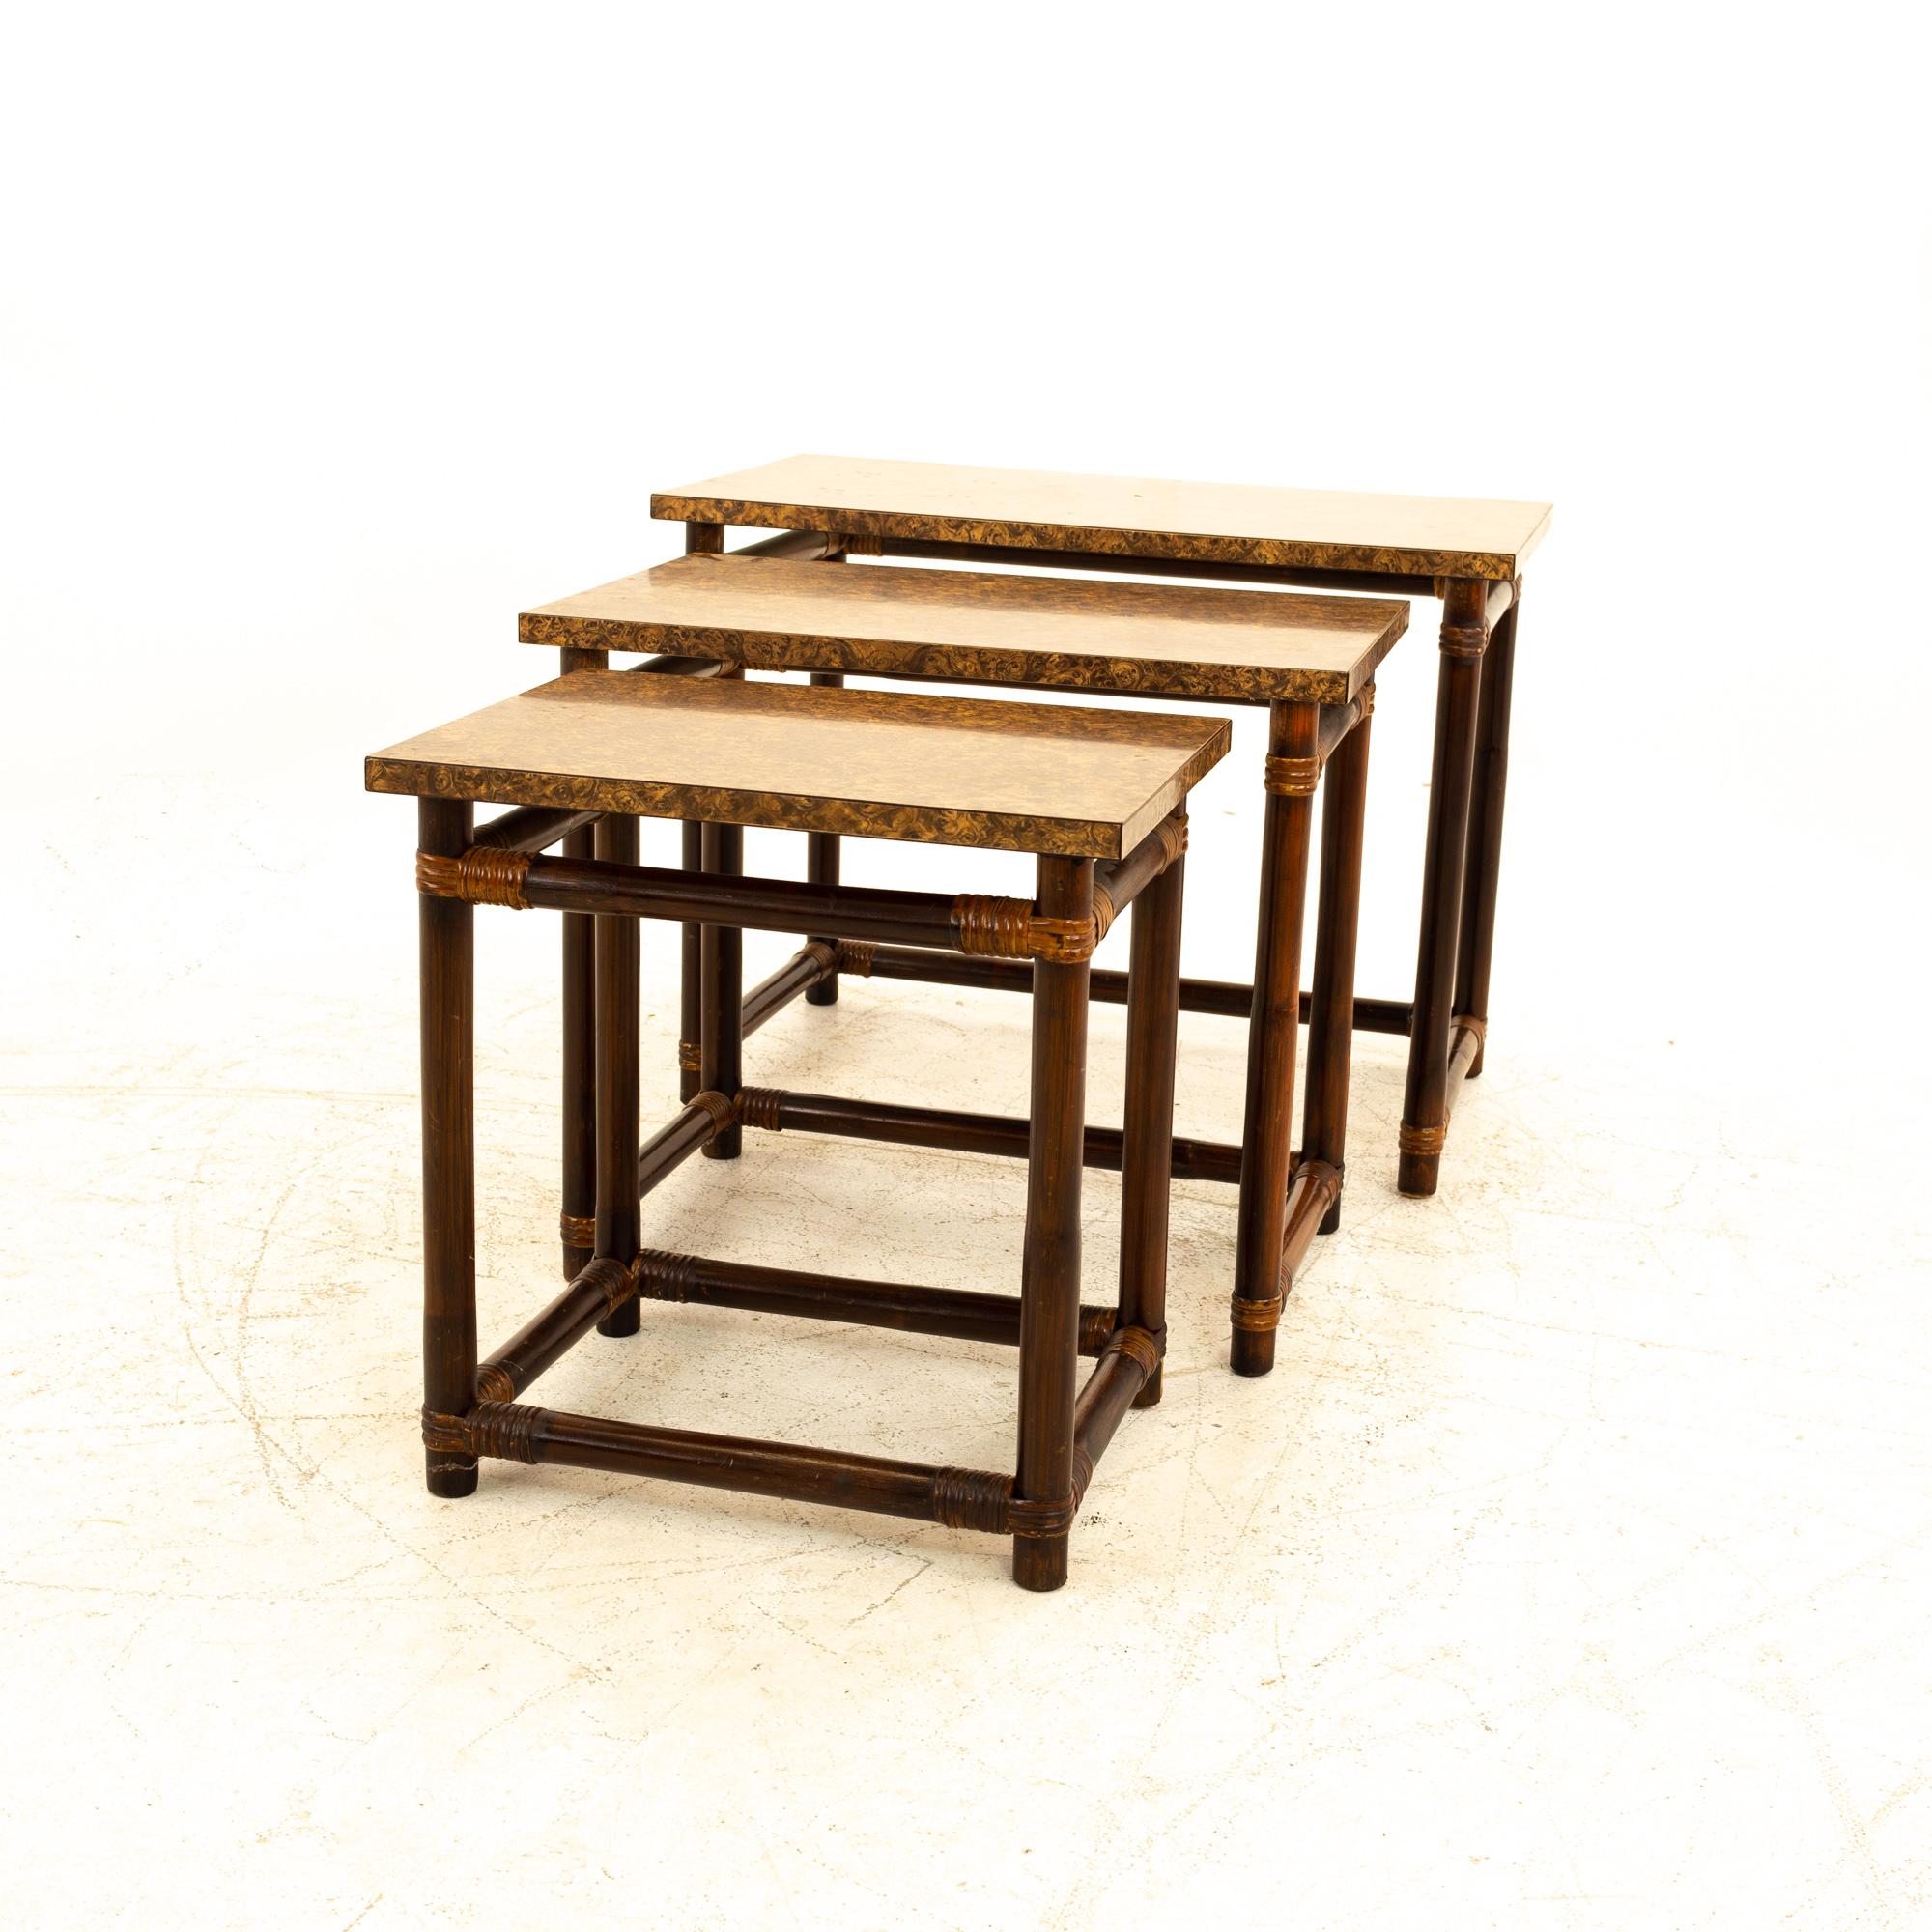 McGuire of California style Mid Century bamboo & burl wood laminate nesting tables

Largest table measures: 29 wide x 16.5 deep x 22 high
Middle table measures: 22.75 wide x 15.75 deep x 20.5 high
Smallest table measures: 18.25 wide x 13.5 deep x